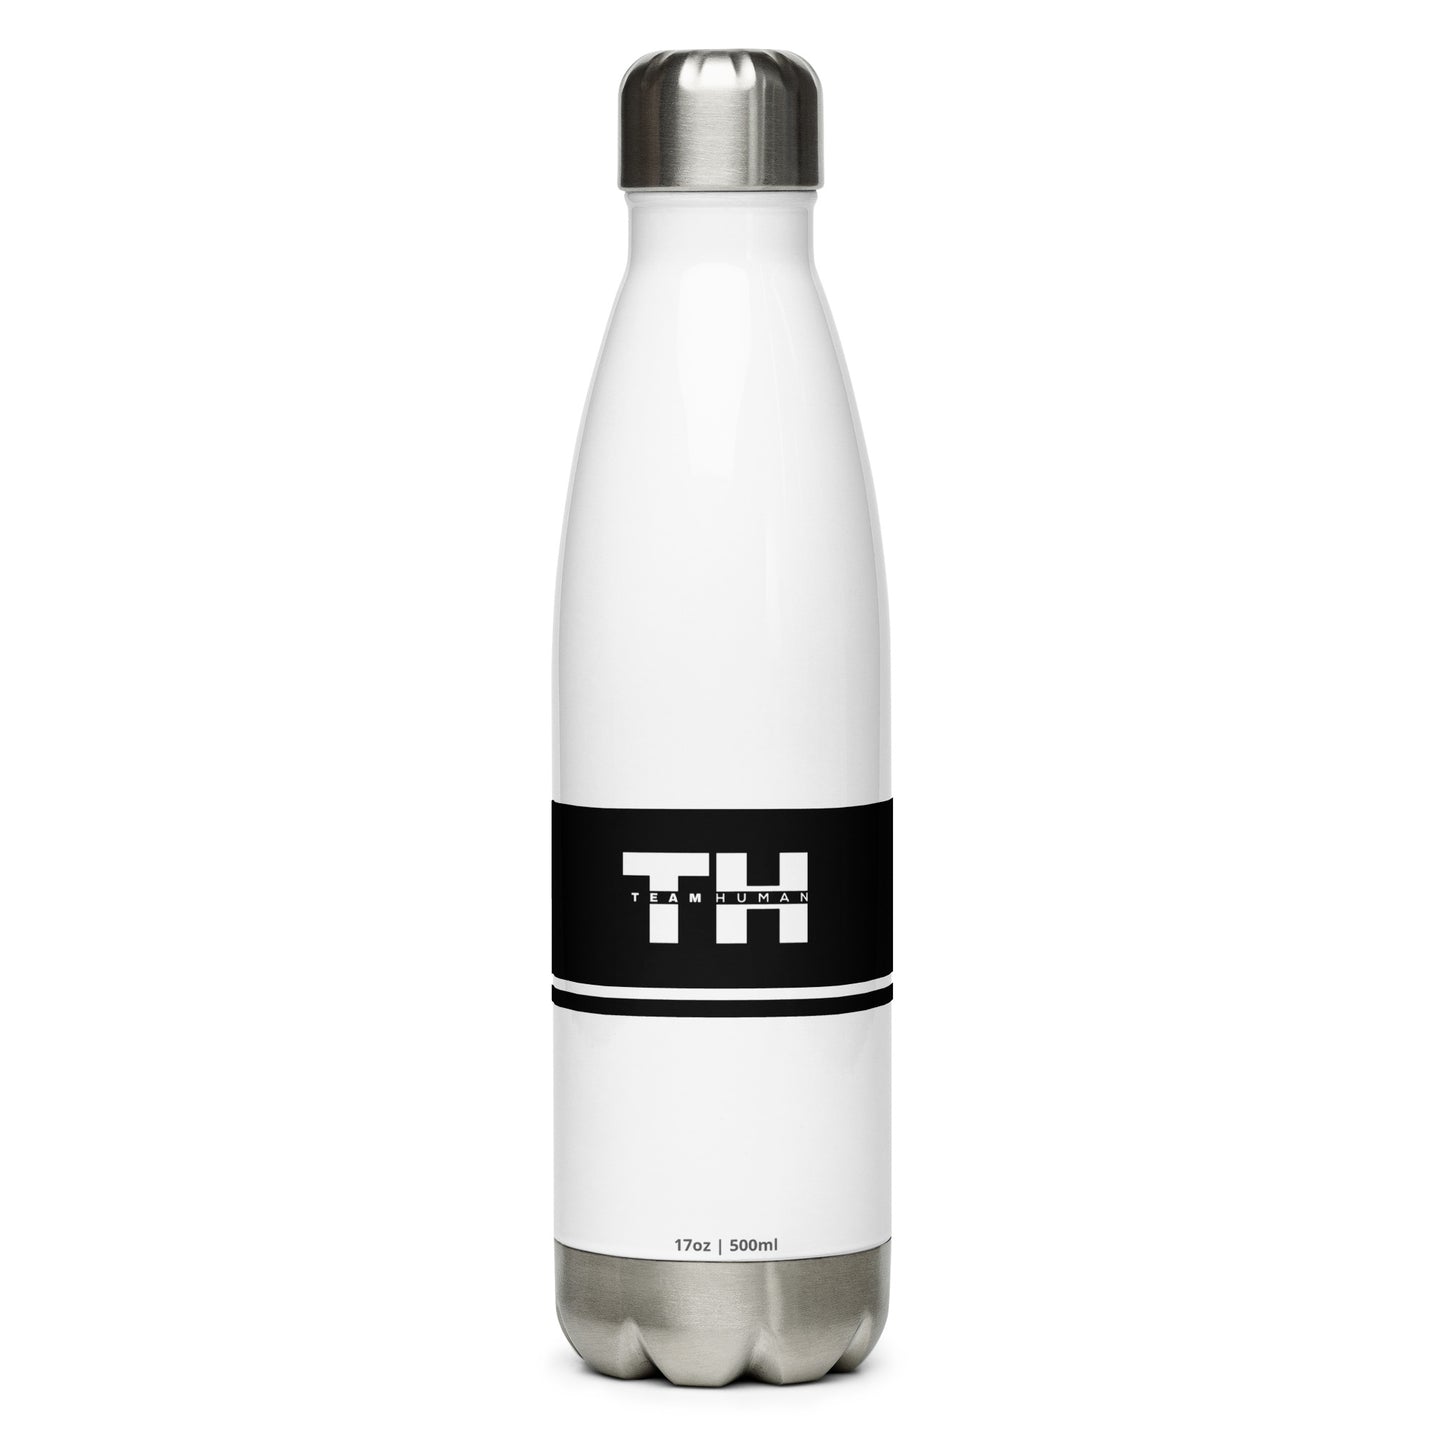 The Stainless Water Bottle